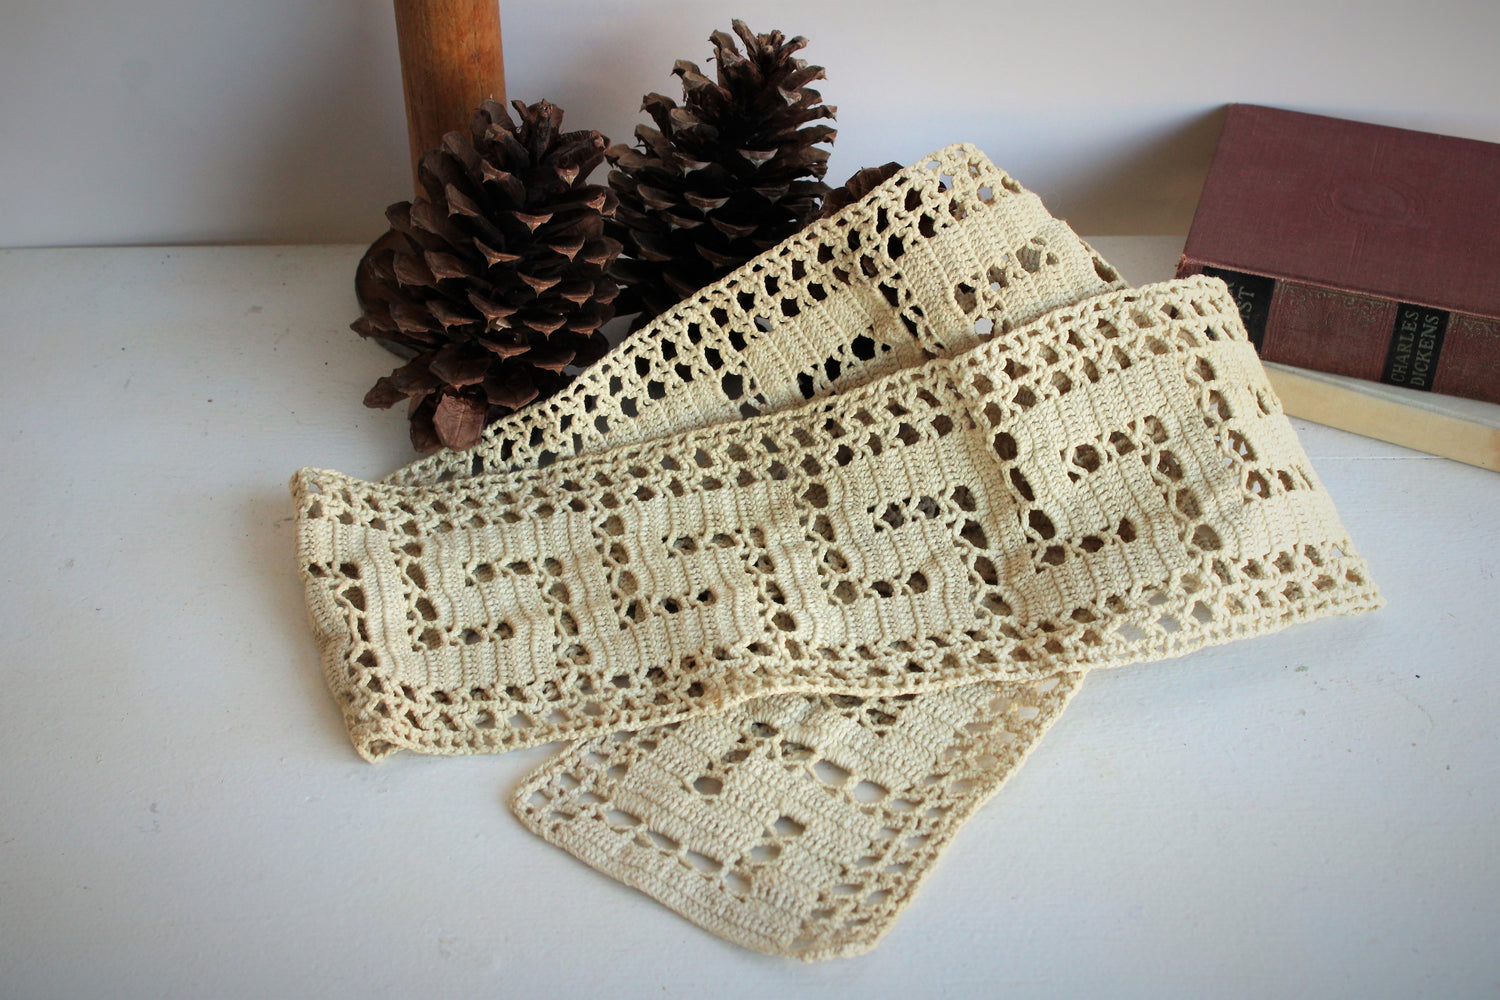 Naturally Plant Dyed Vintage Beige Crochet Lace